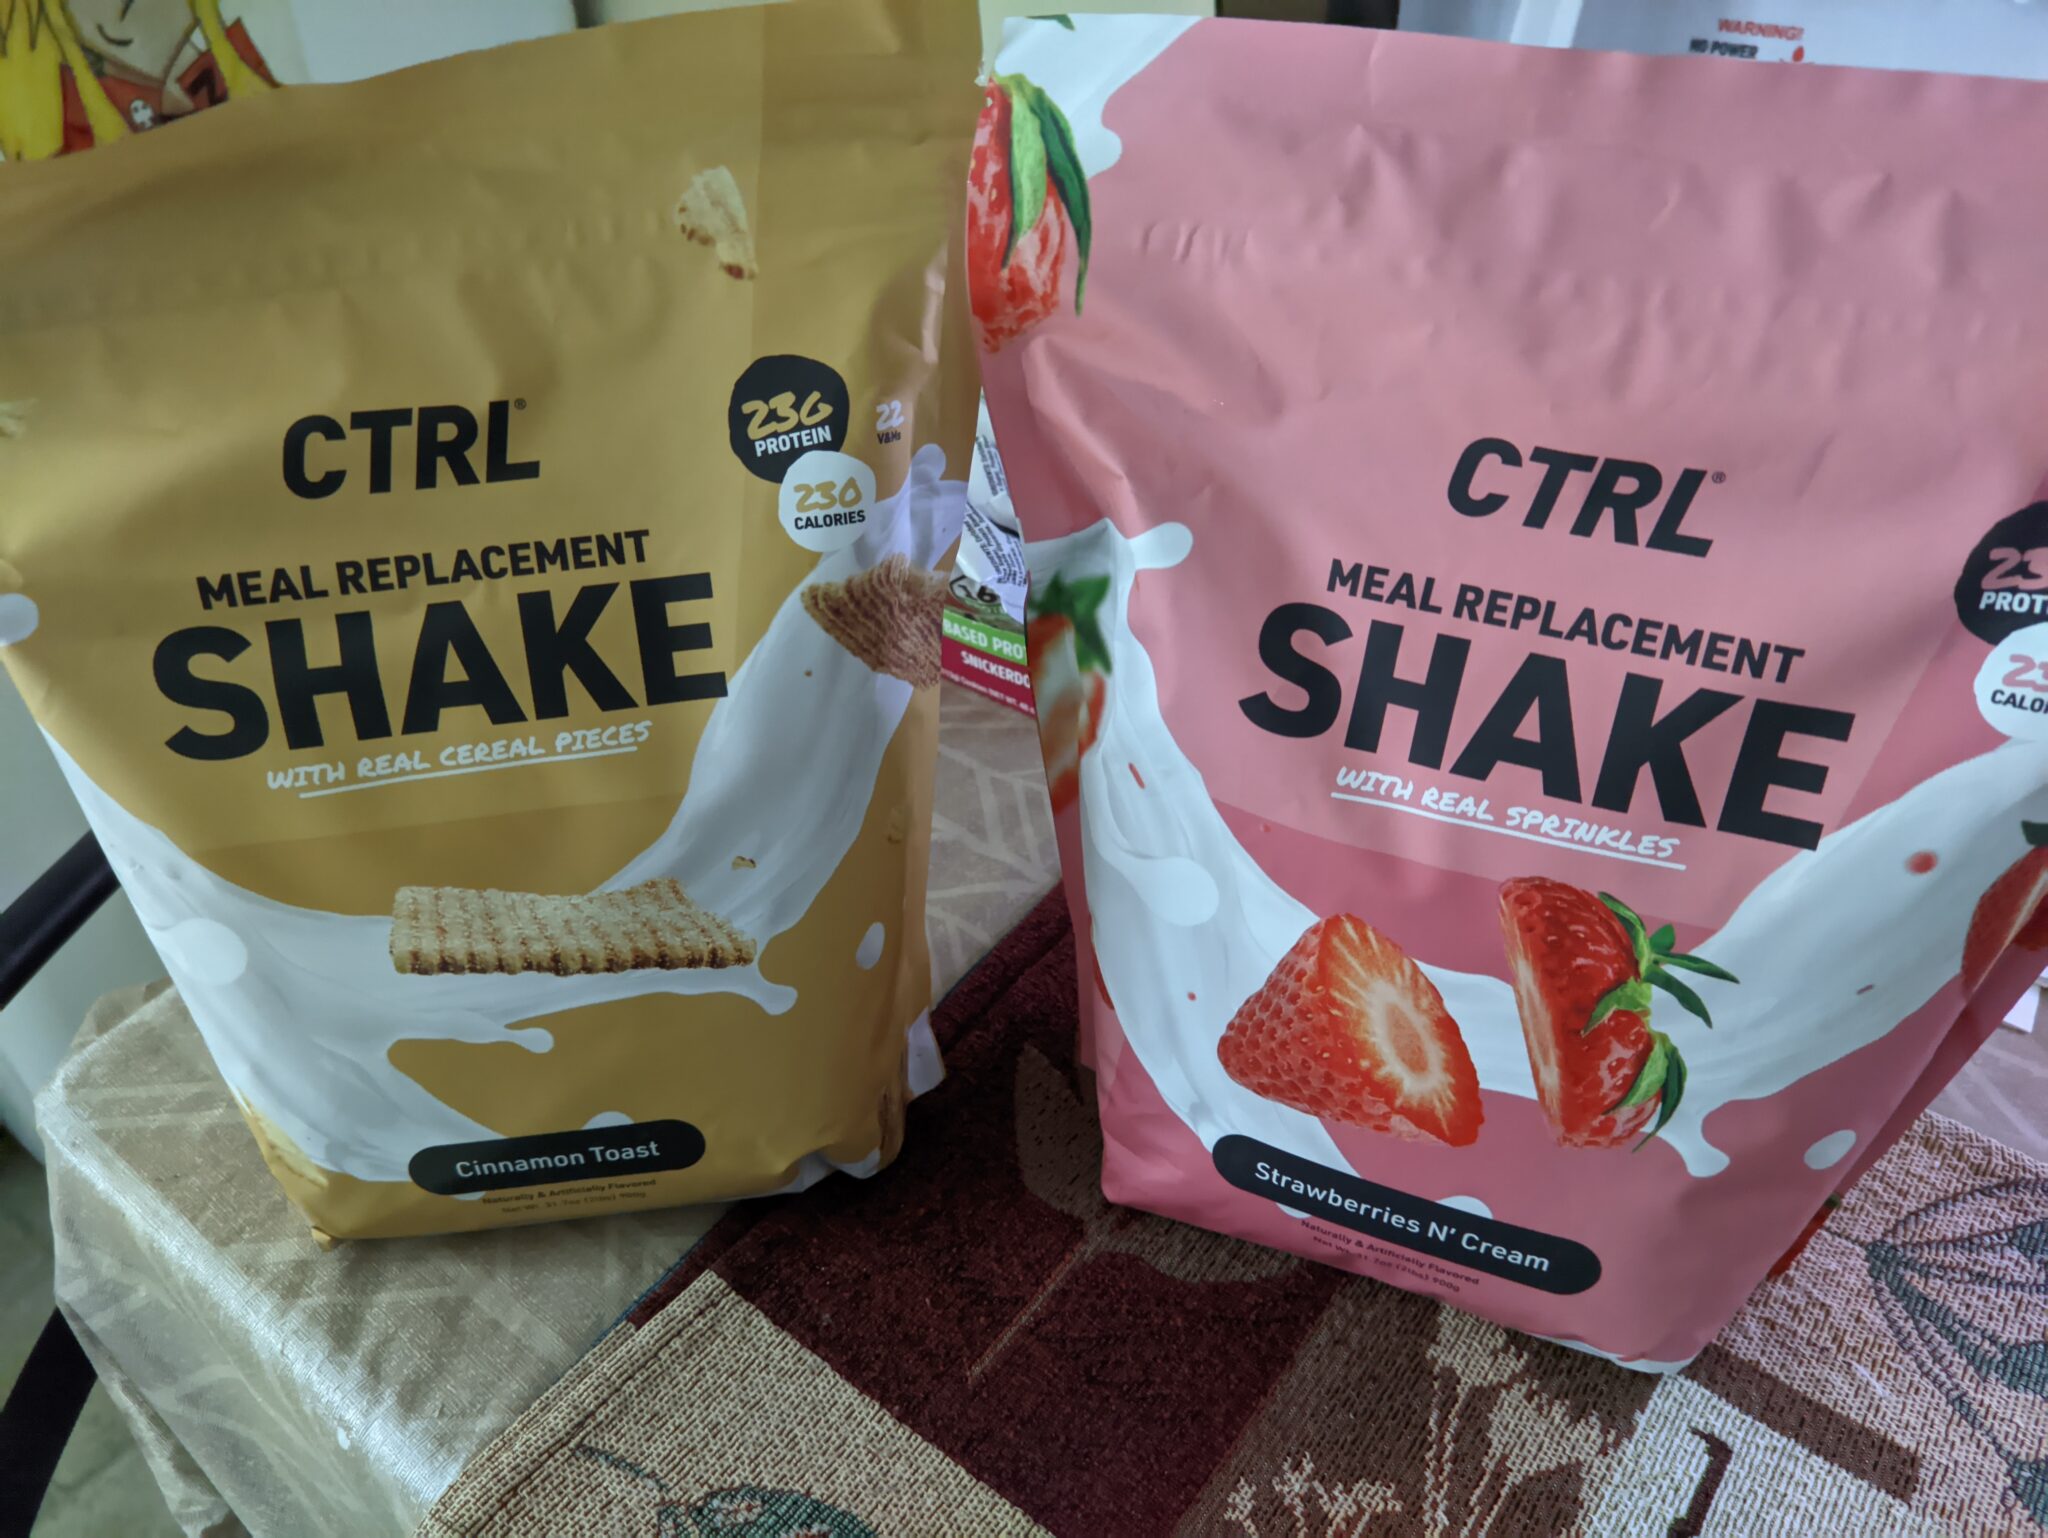 CTRL meal replacement shake bags